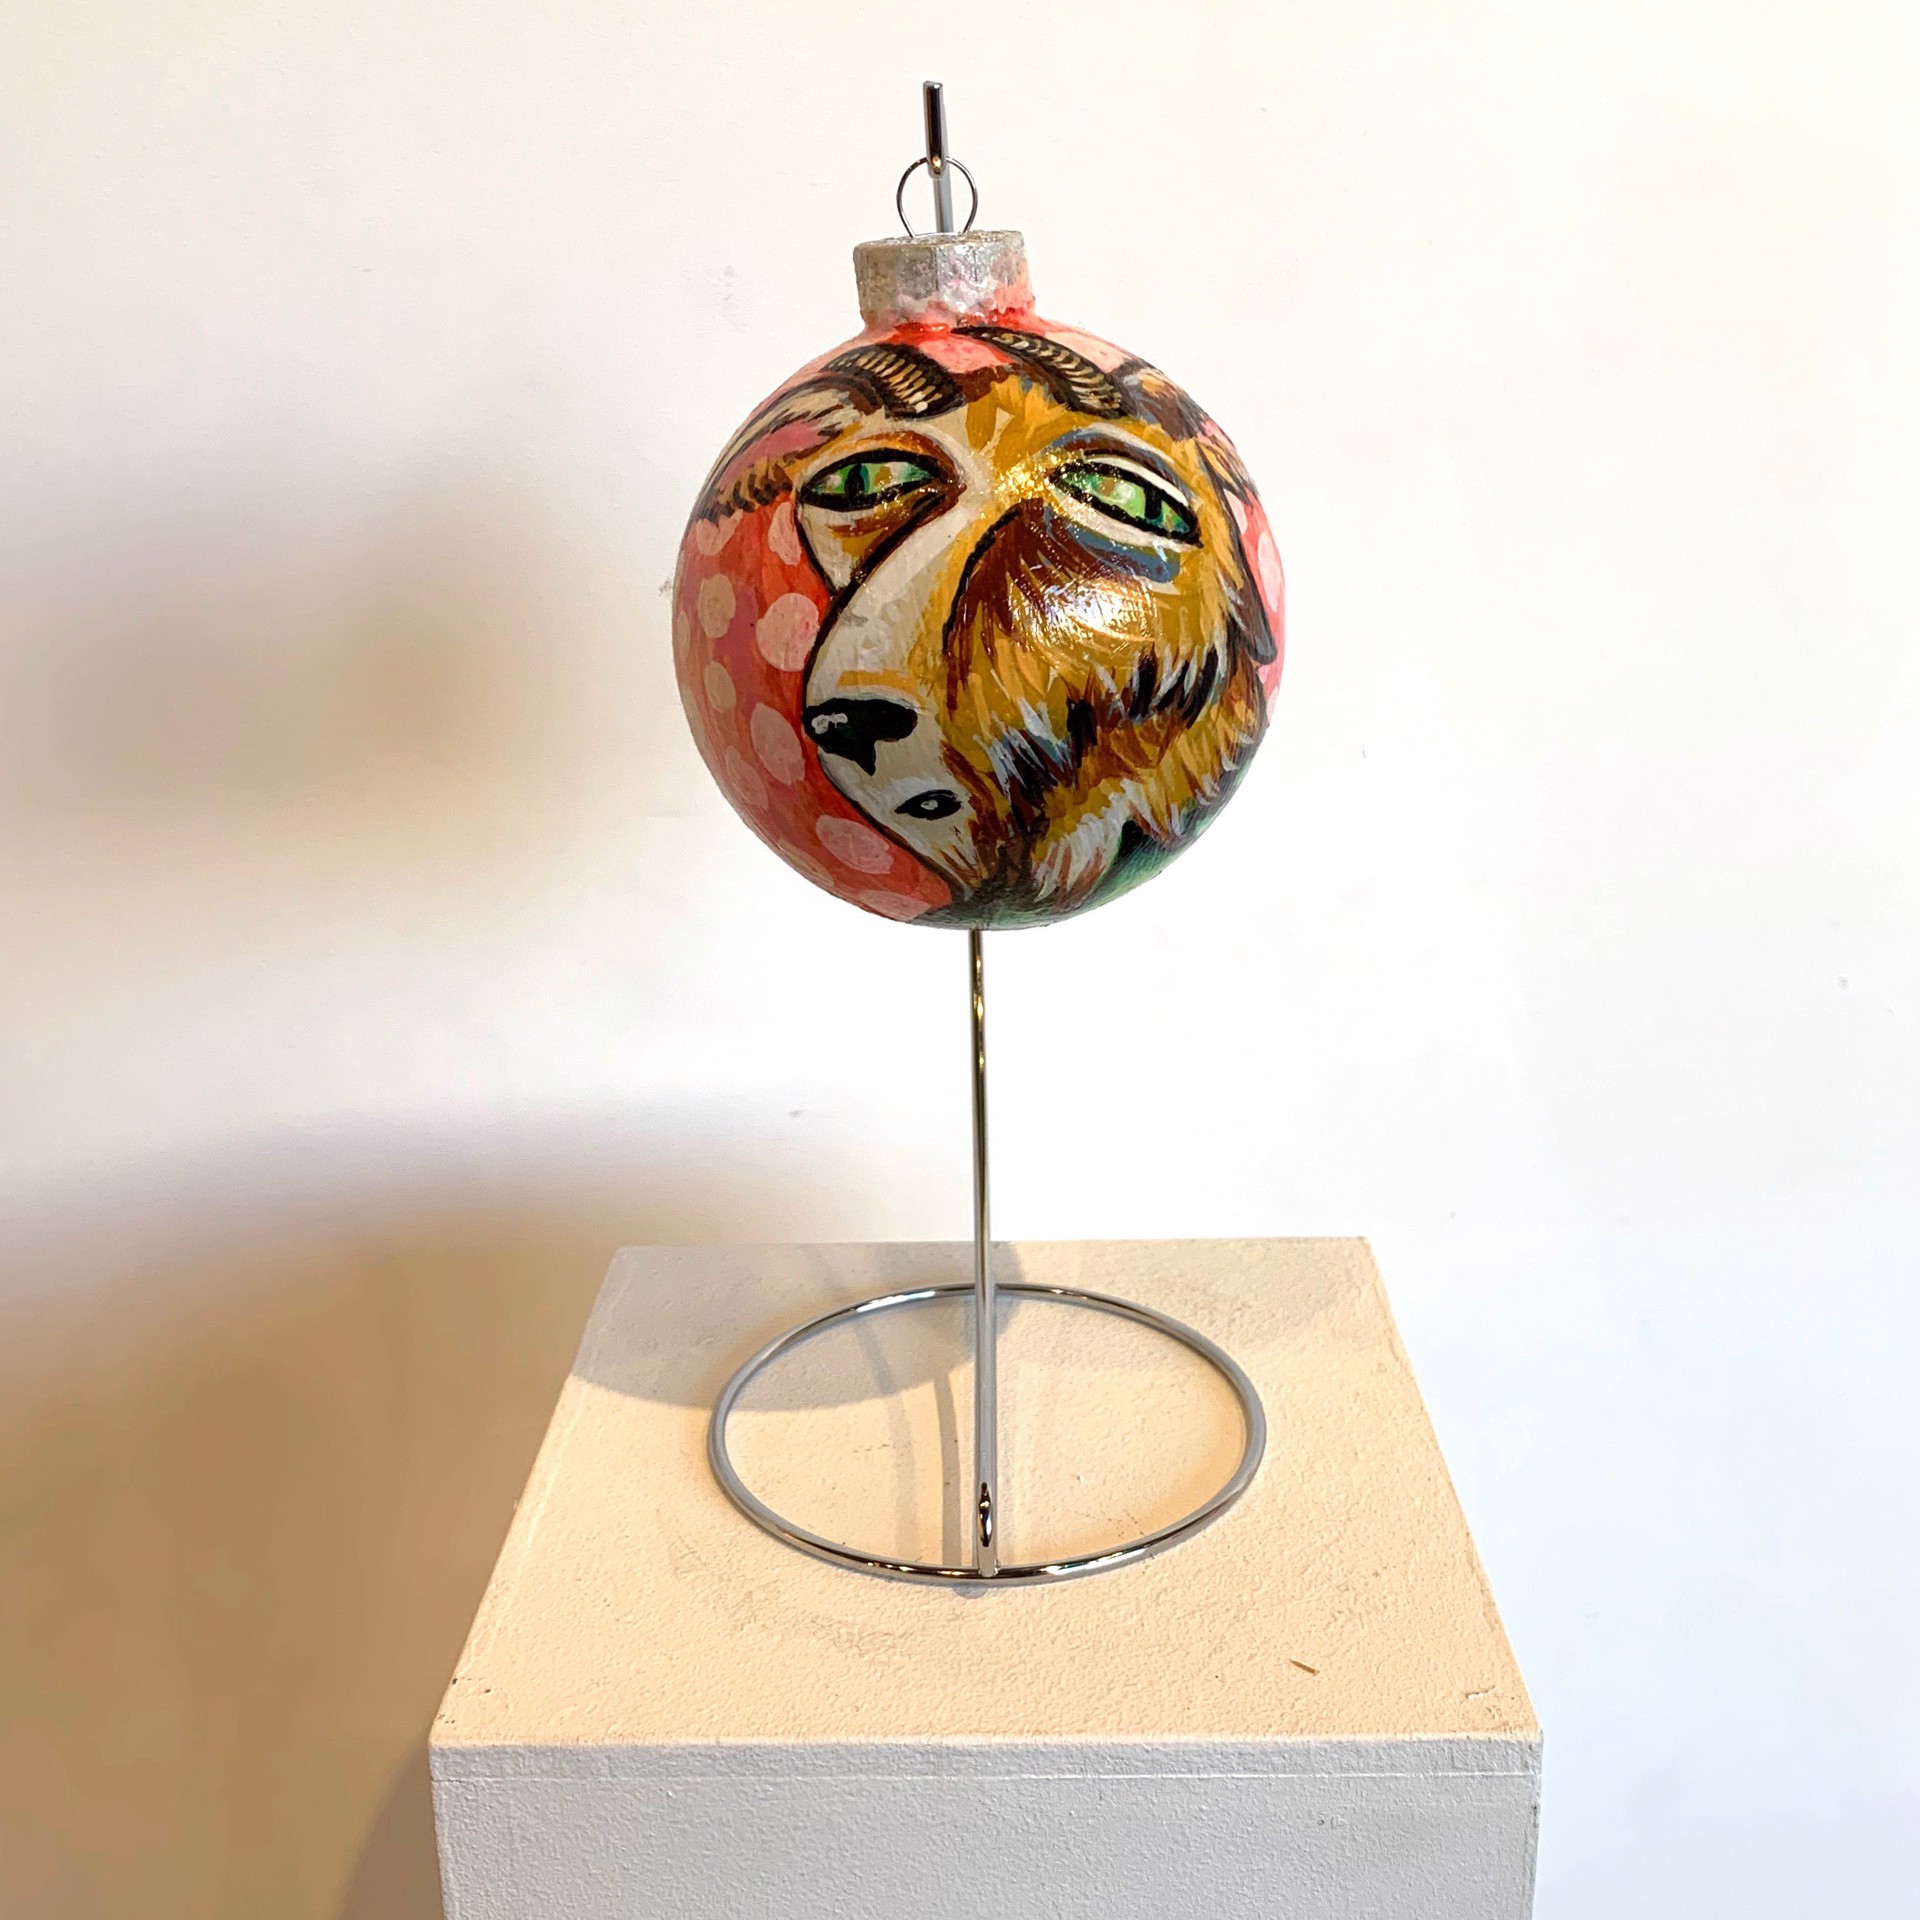 Large Ornament #3 by Carol Powell